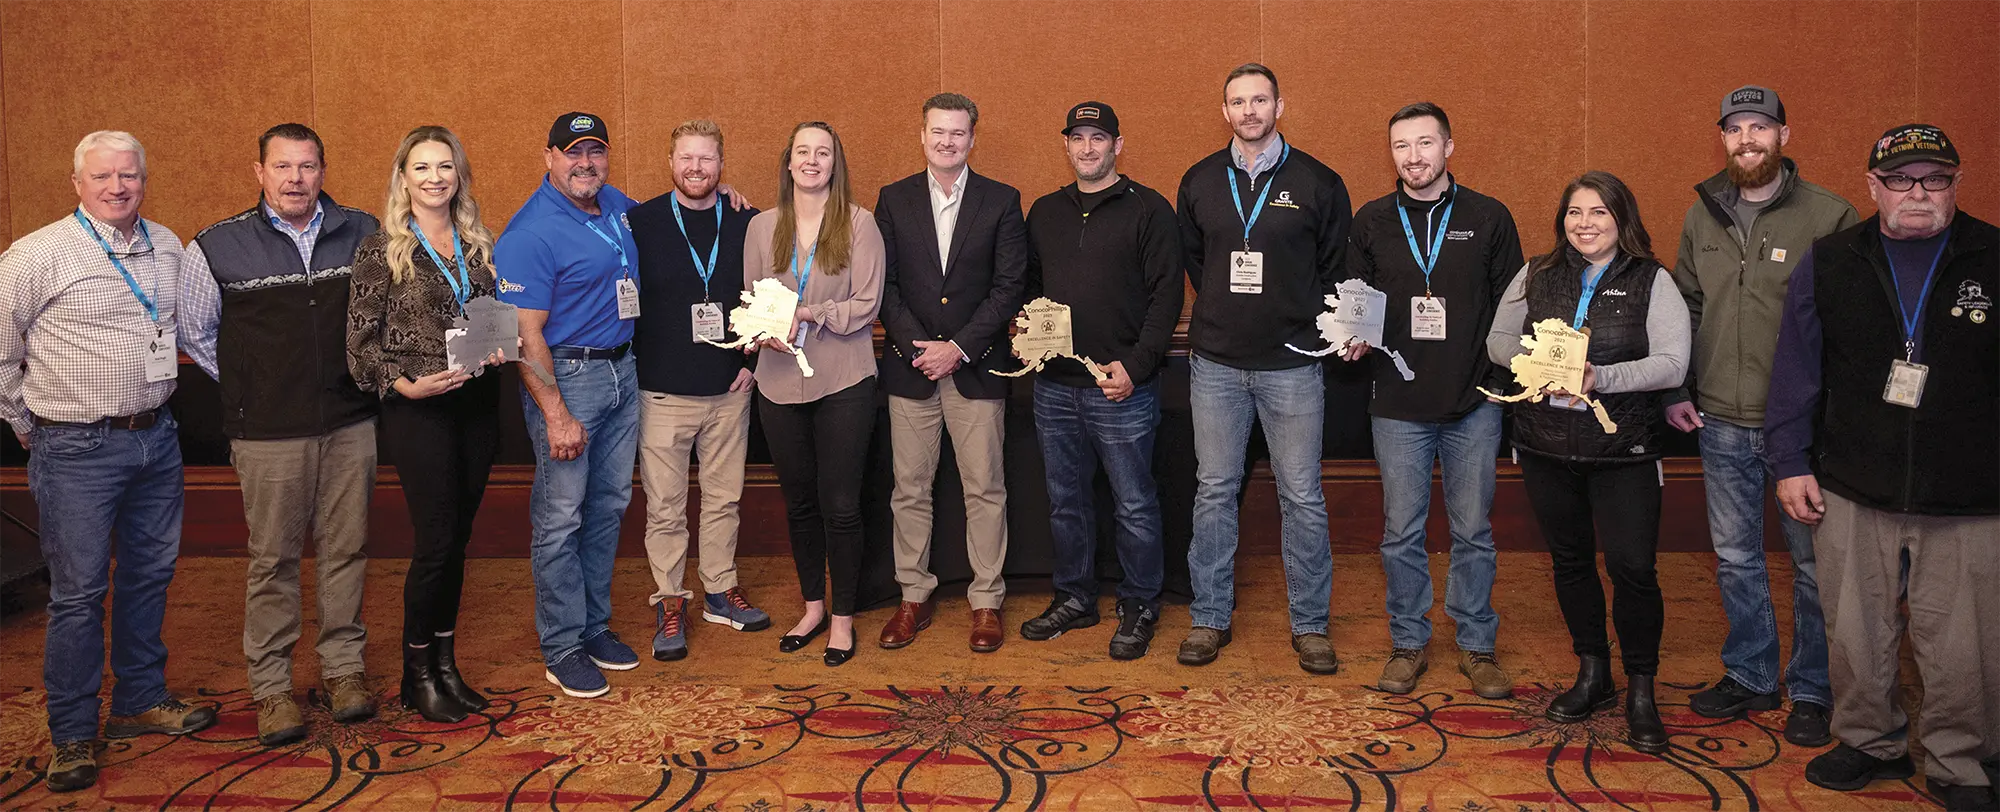 ConocoPhillips Excellence in Safety award winners grouped together at event